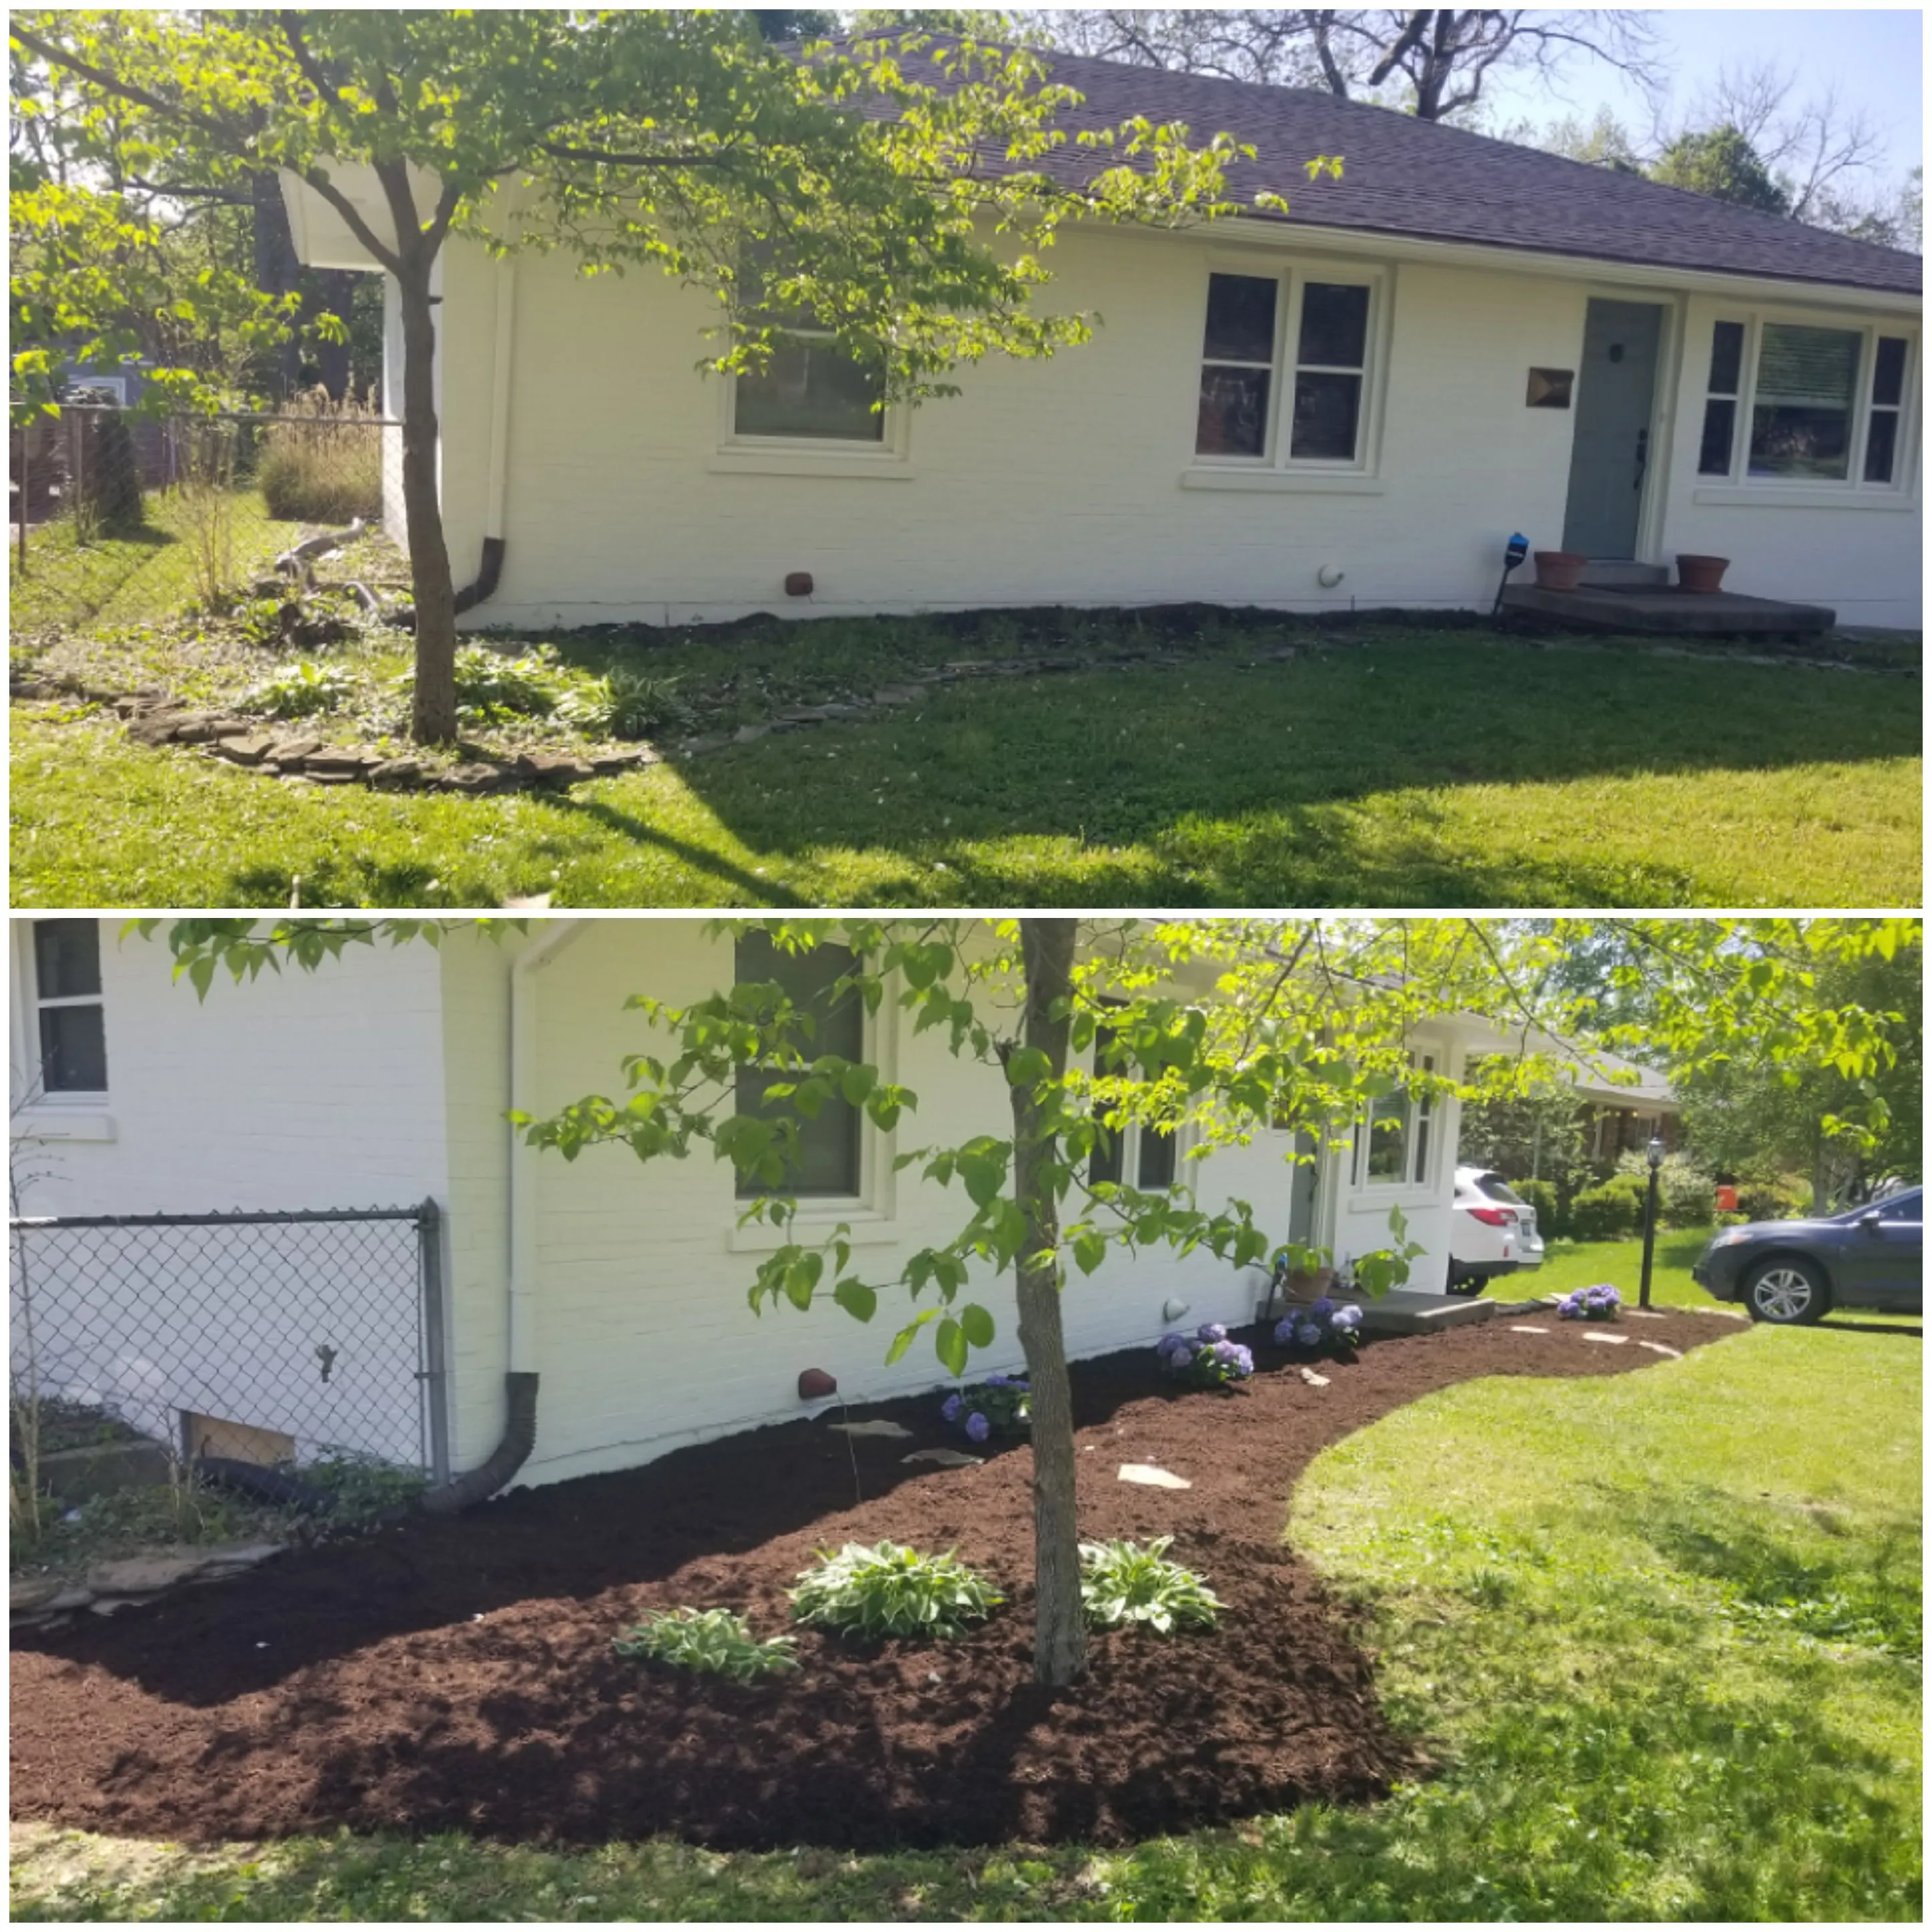 Landscaping Services In Lexington Ky